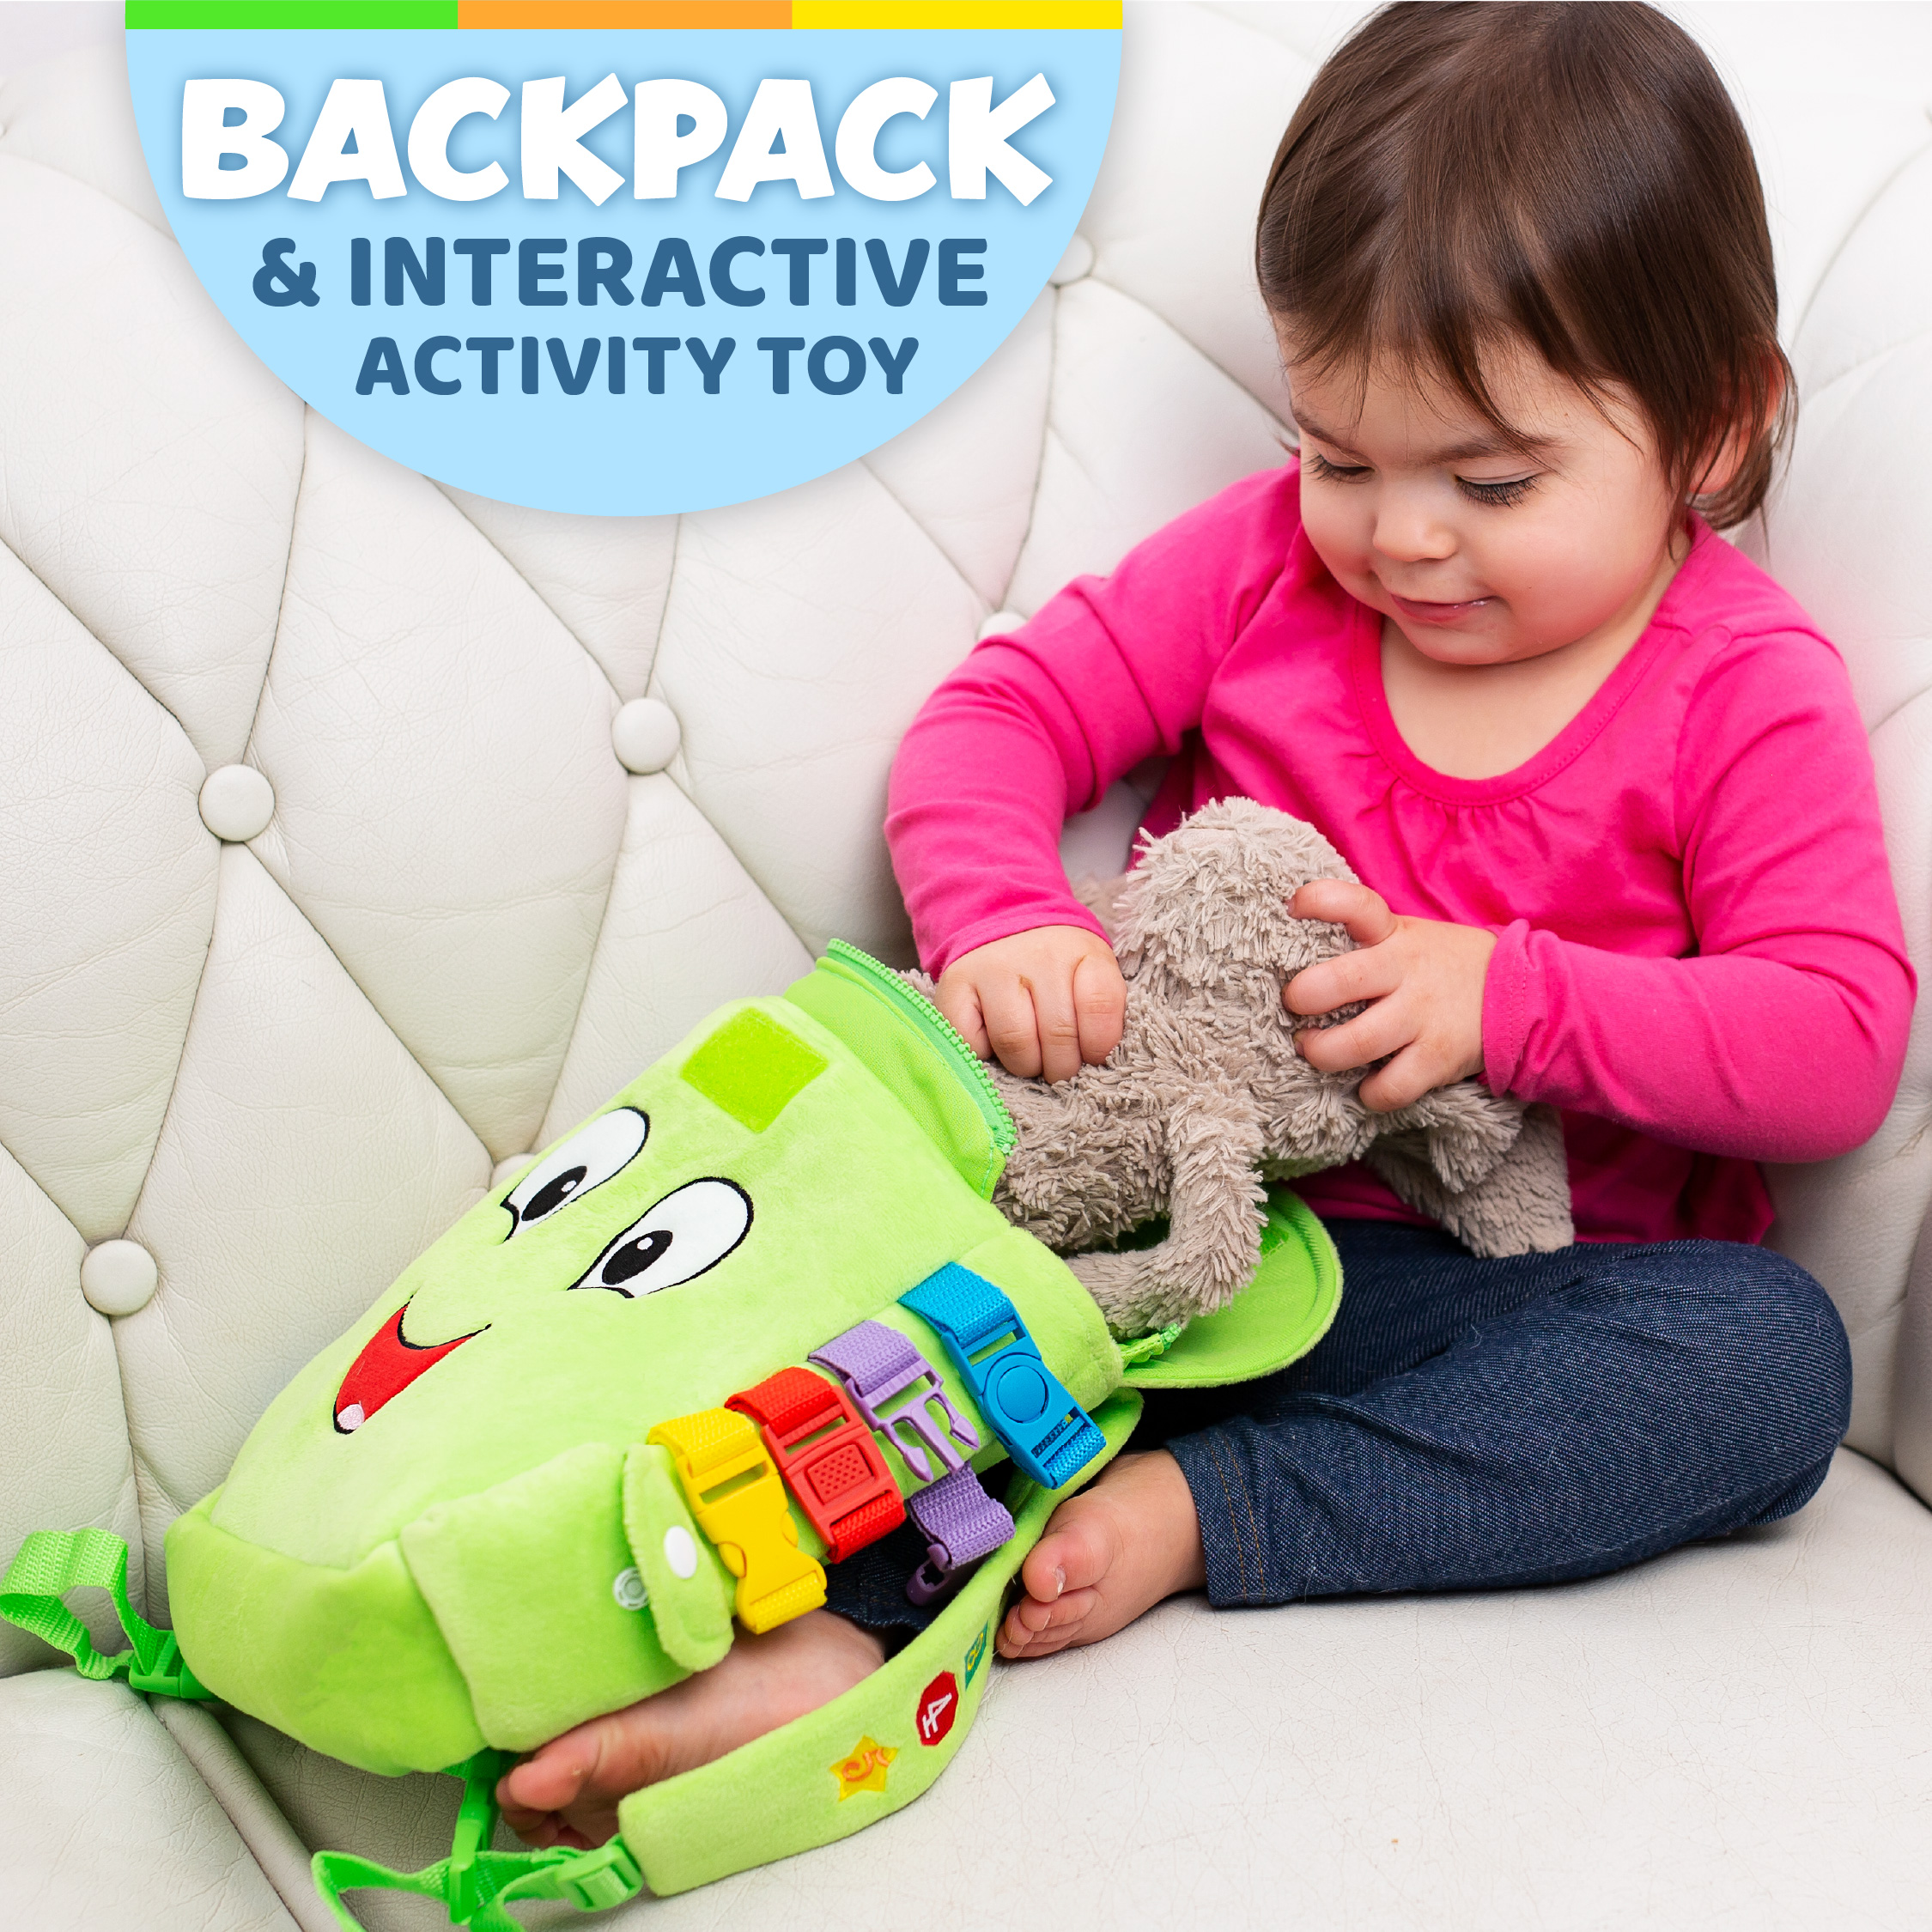 Buckle Toy - Buddy Activity Backpack - Educational Pre-K Learning Activity Toy - Zippered Pouch for Storage - Great Gift for Toddlers and Kids - image 2 of 6